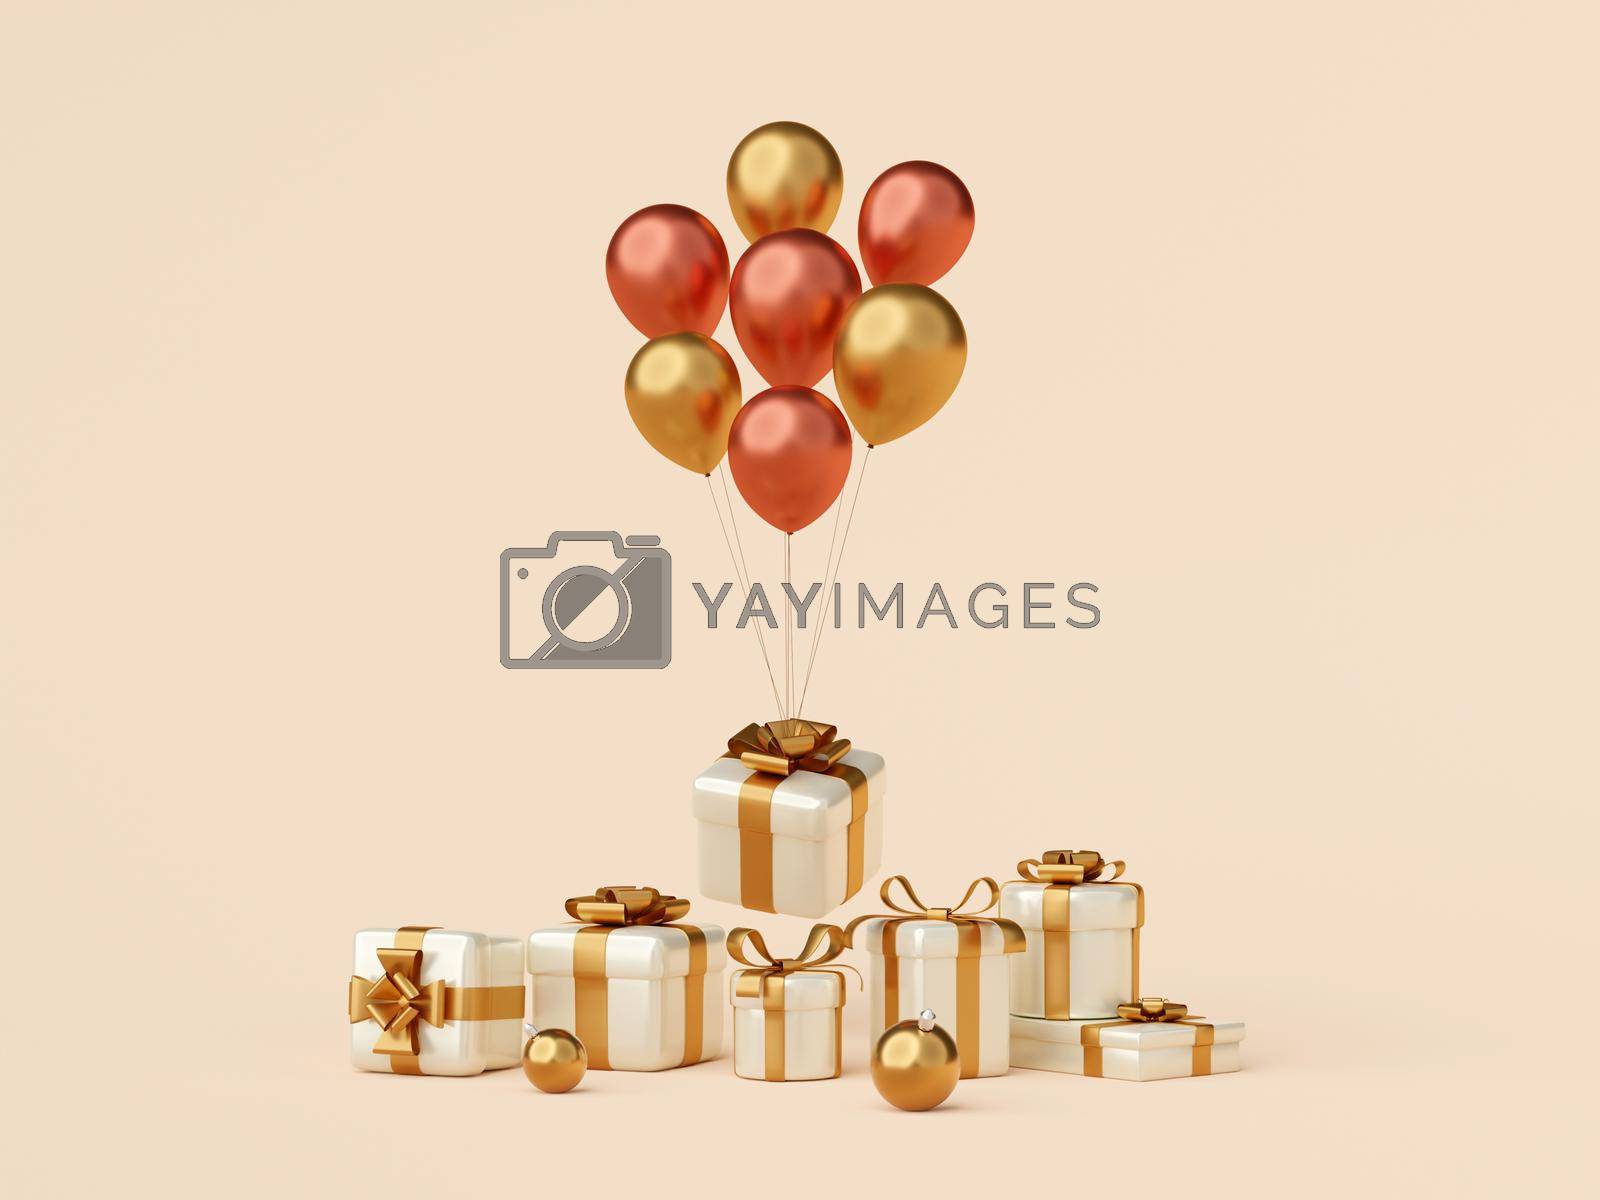 Royalty free image of Gift box with balloons for Christmas celebration, 3d illustration by nutzchotwarut